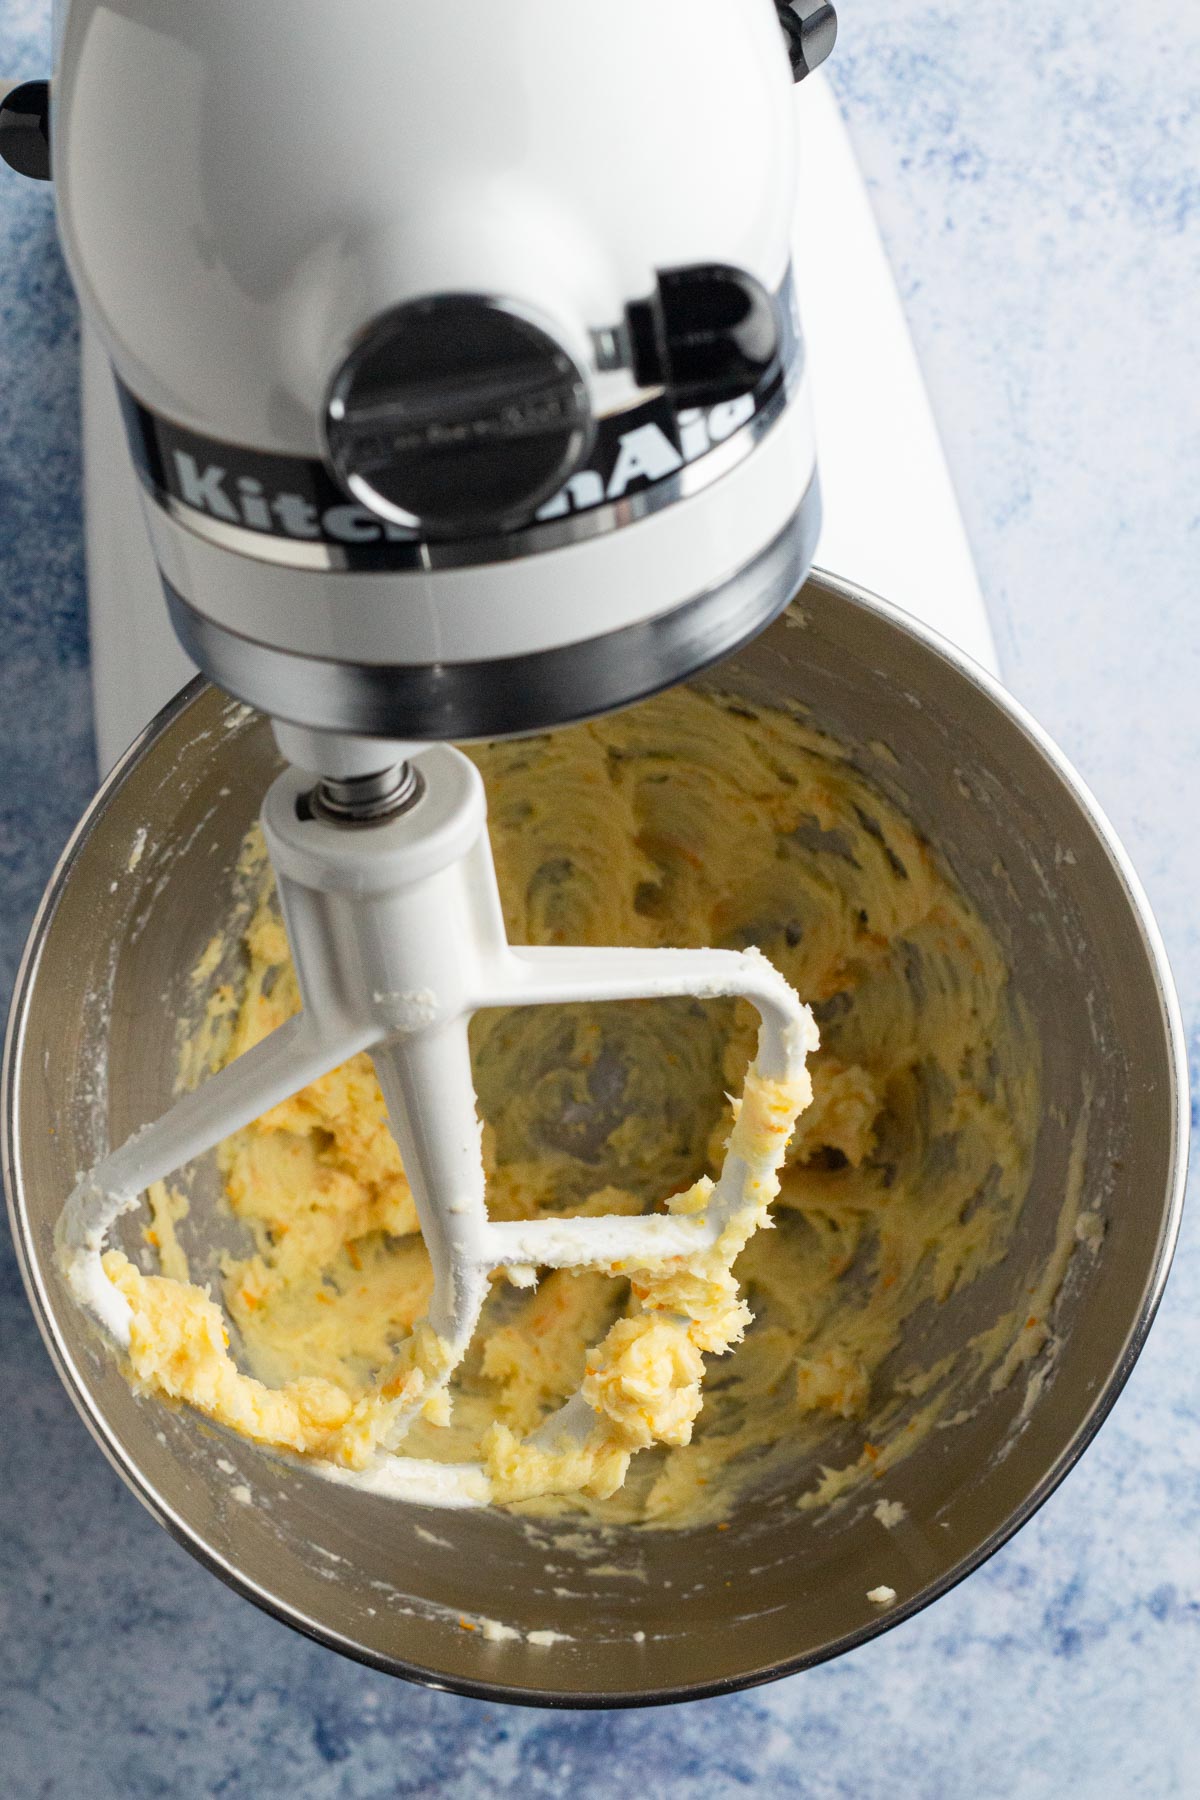 Butter and sugar mixture in a white stand mixer on a blue surface.